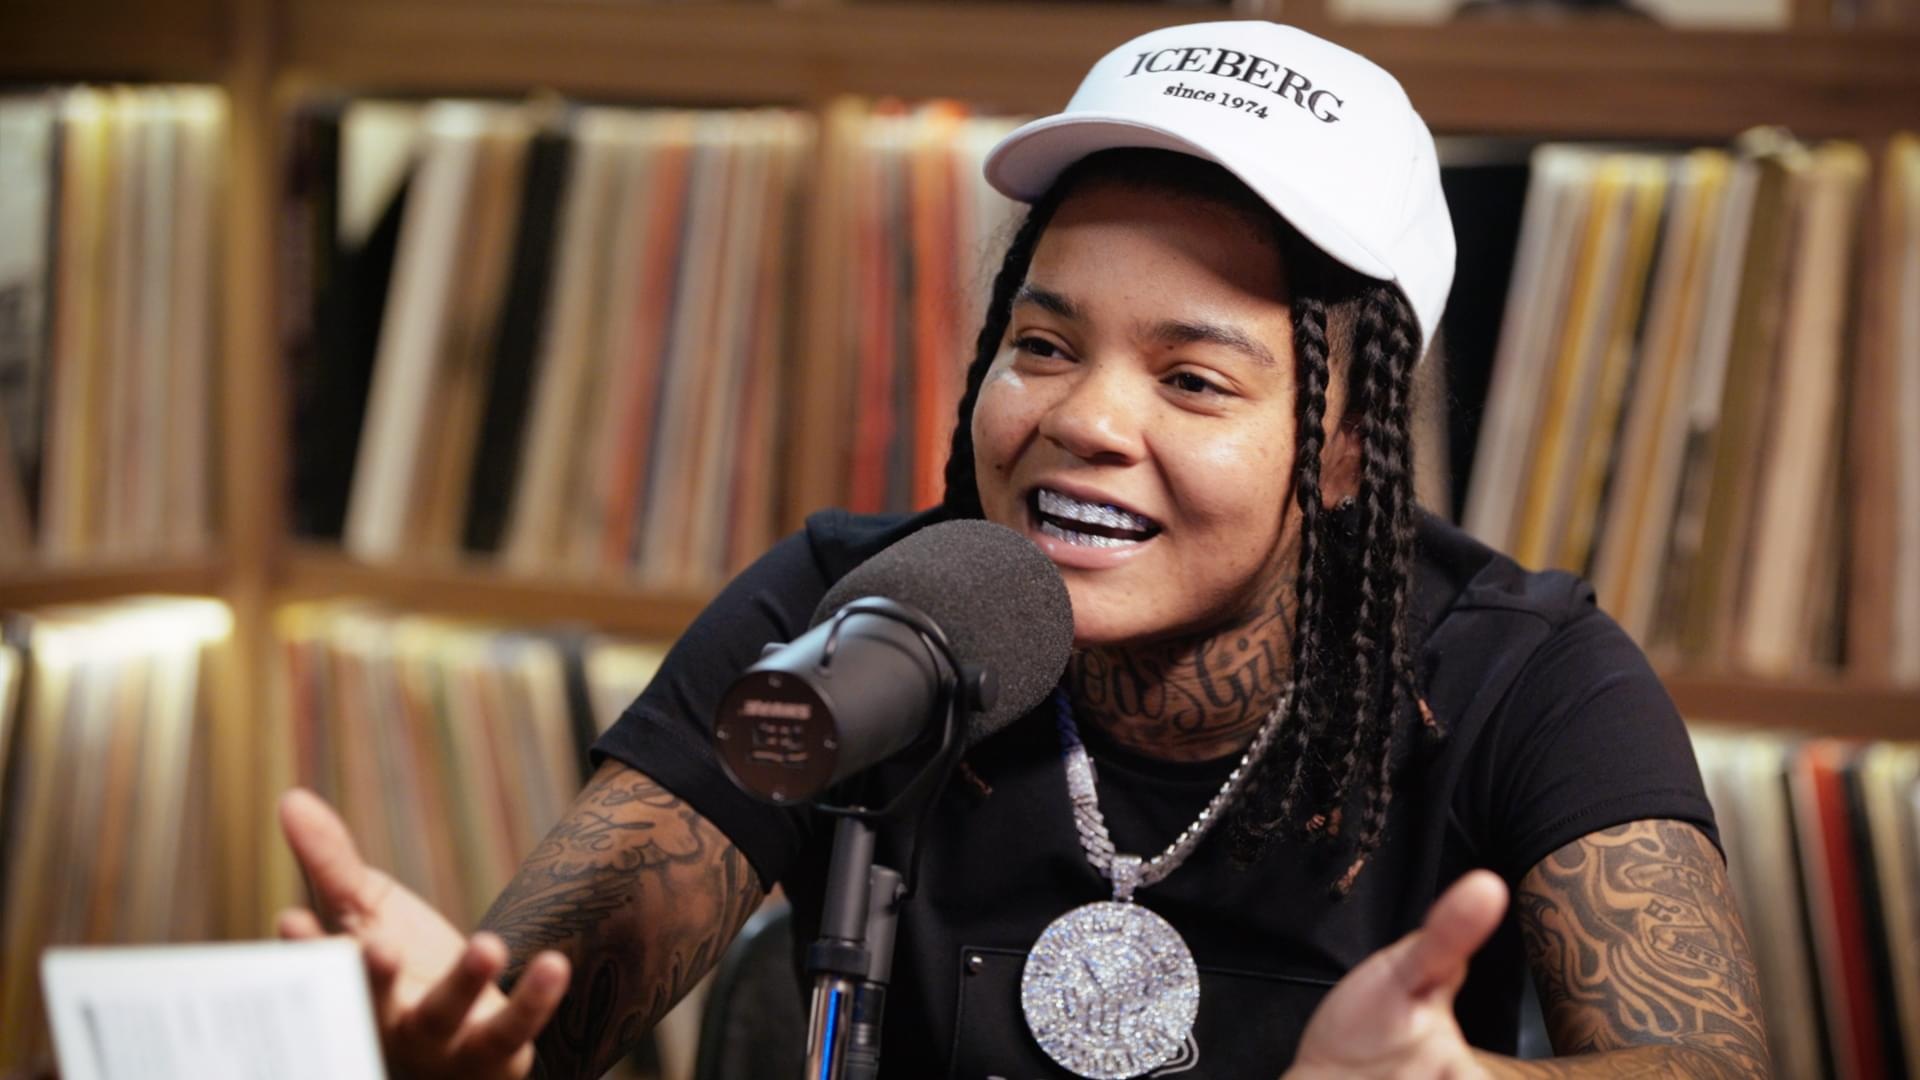 Young M.A: Freestyles "Who Run It" and "I Get The Bag" have gained millions of online streams. 1920x1080 Full HD Background.